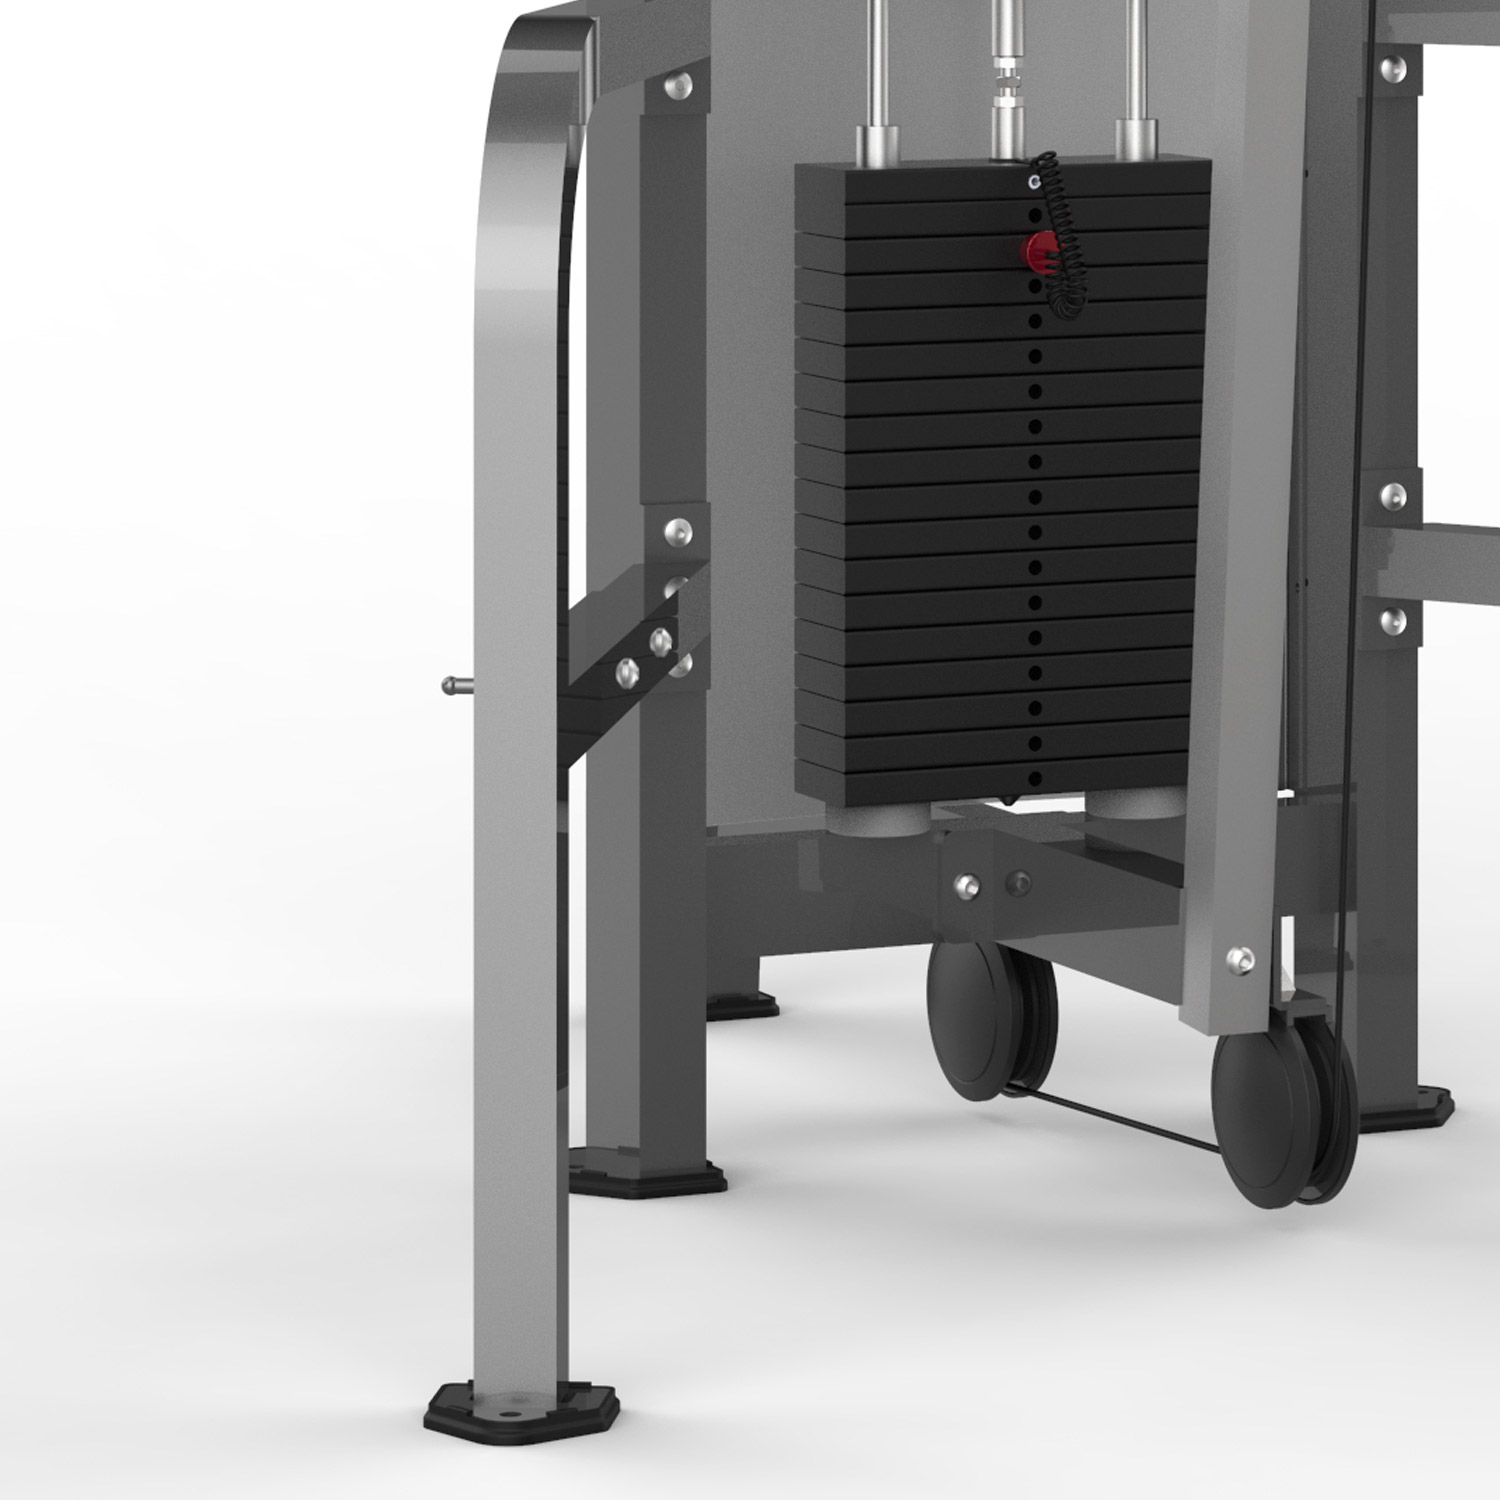 PF-1010 Double Pulley Machine